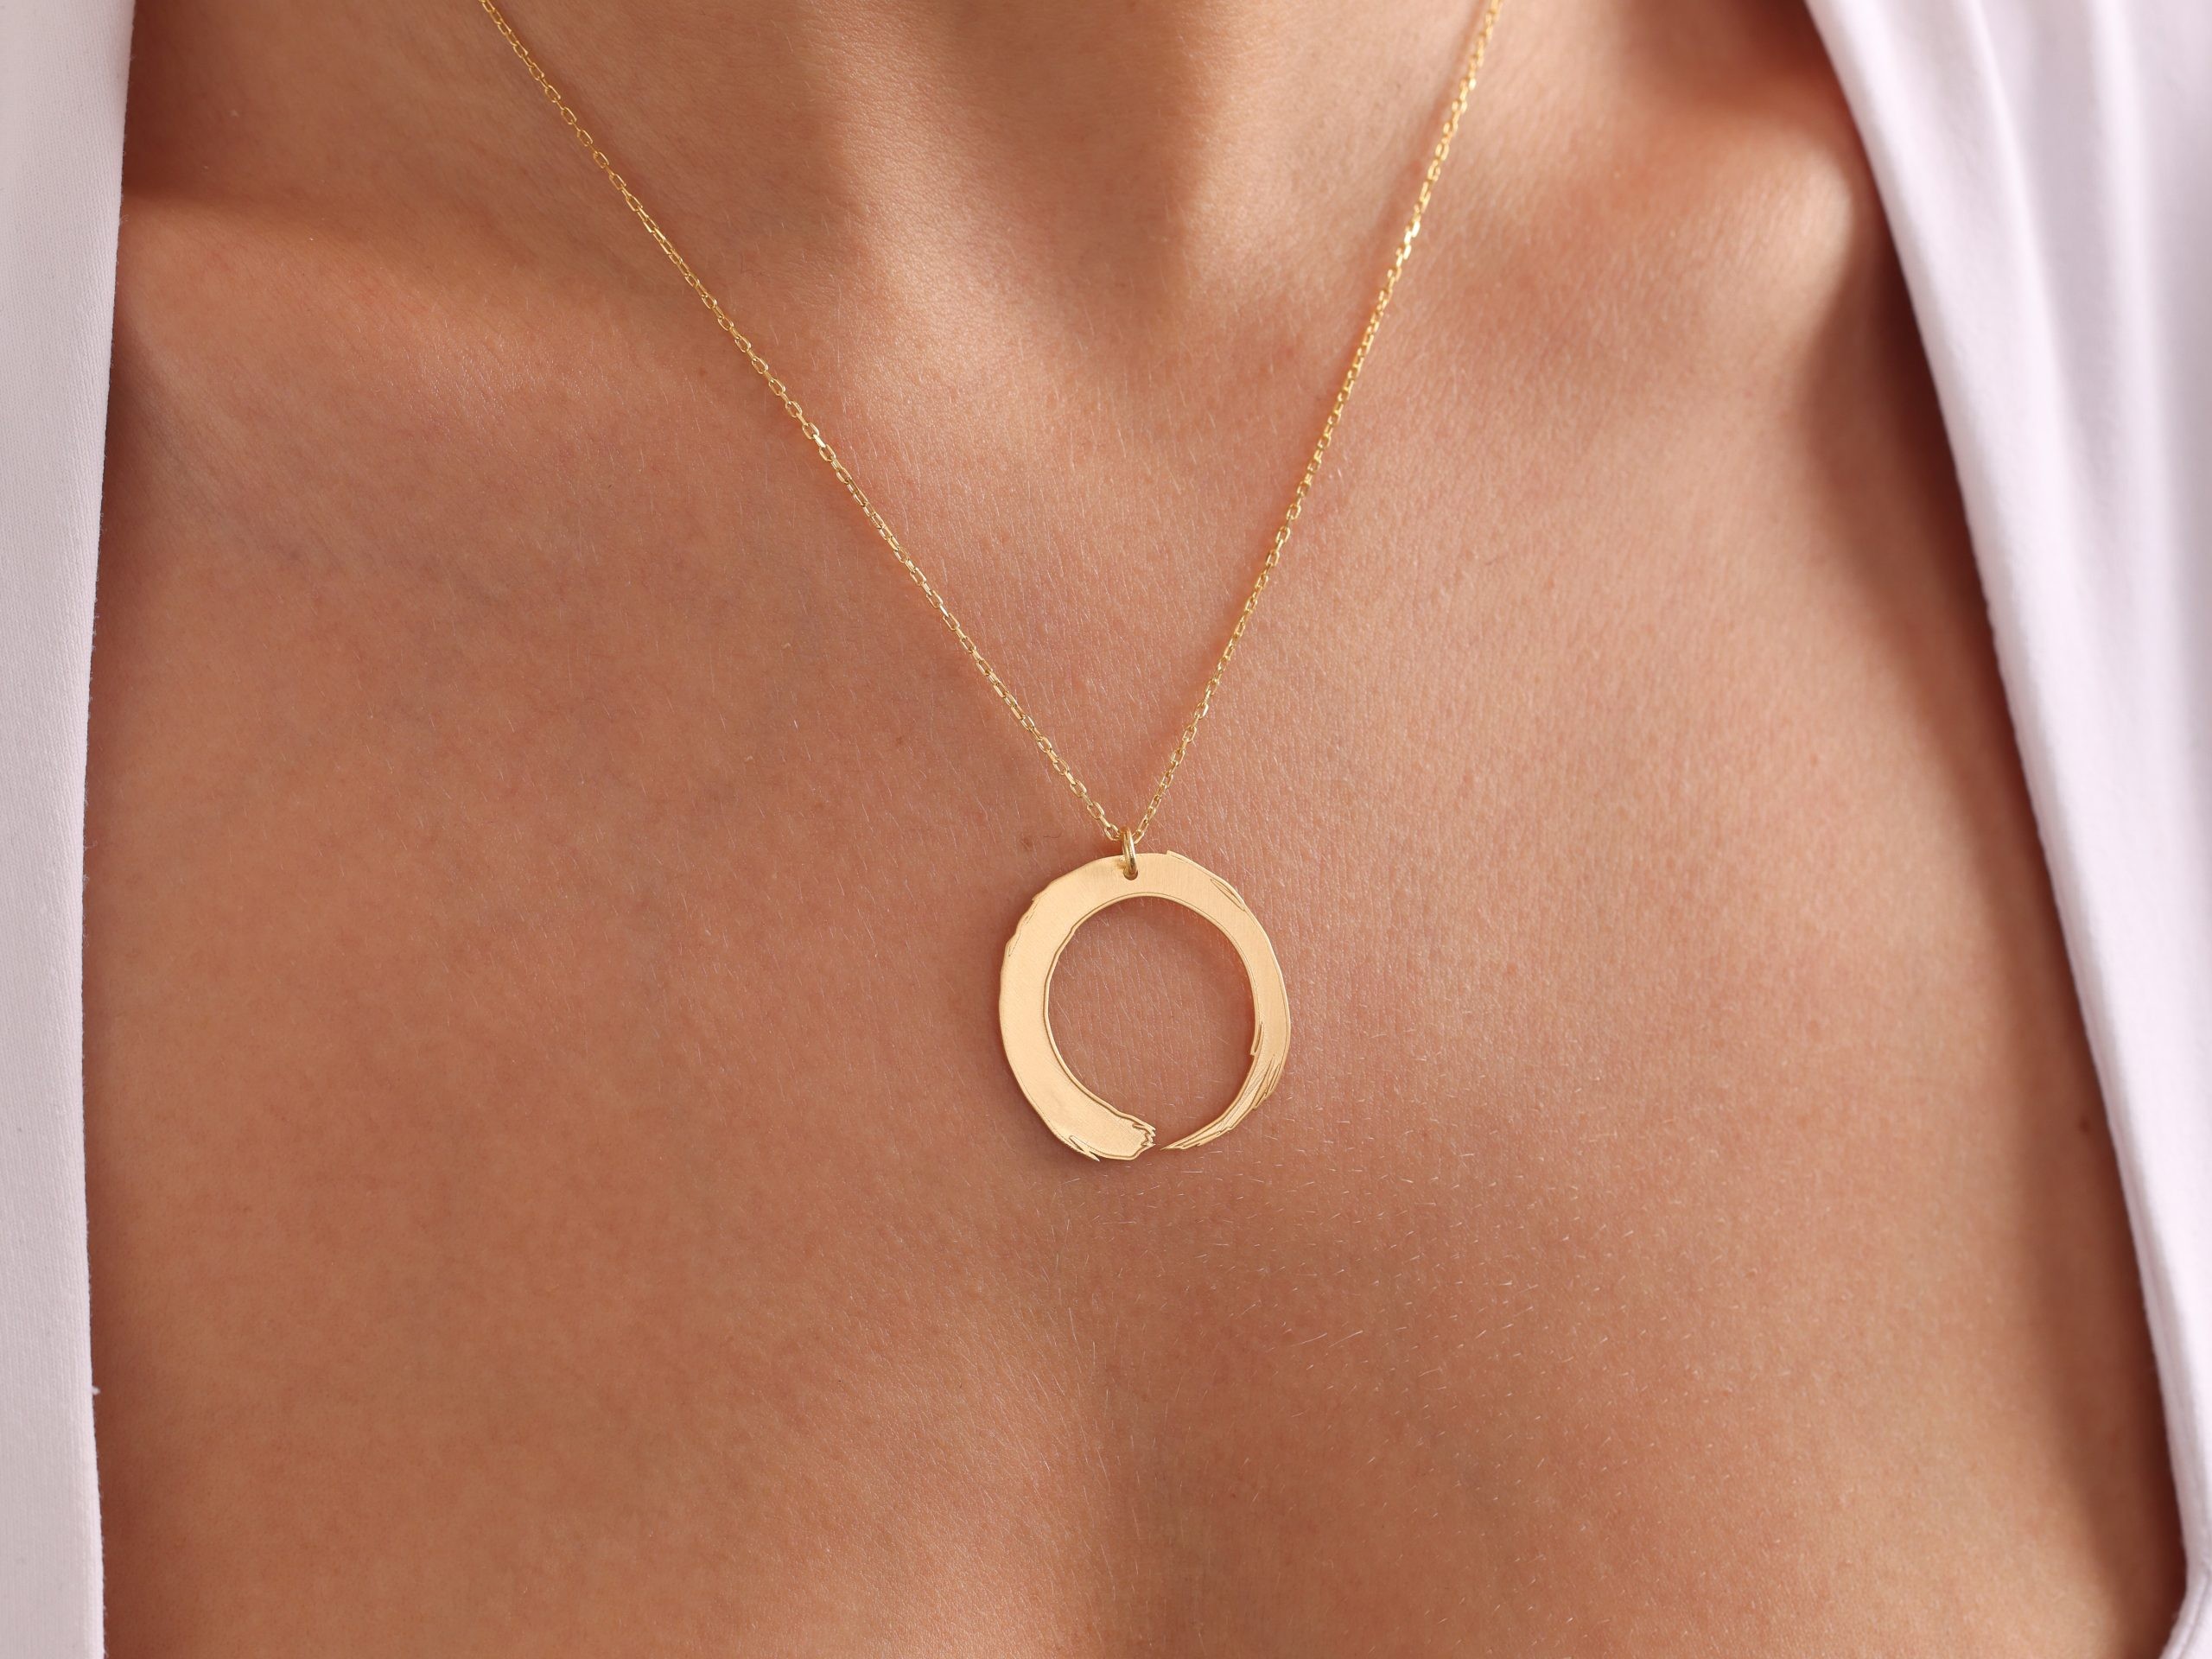 Enso Necklace